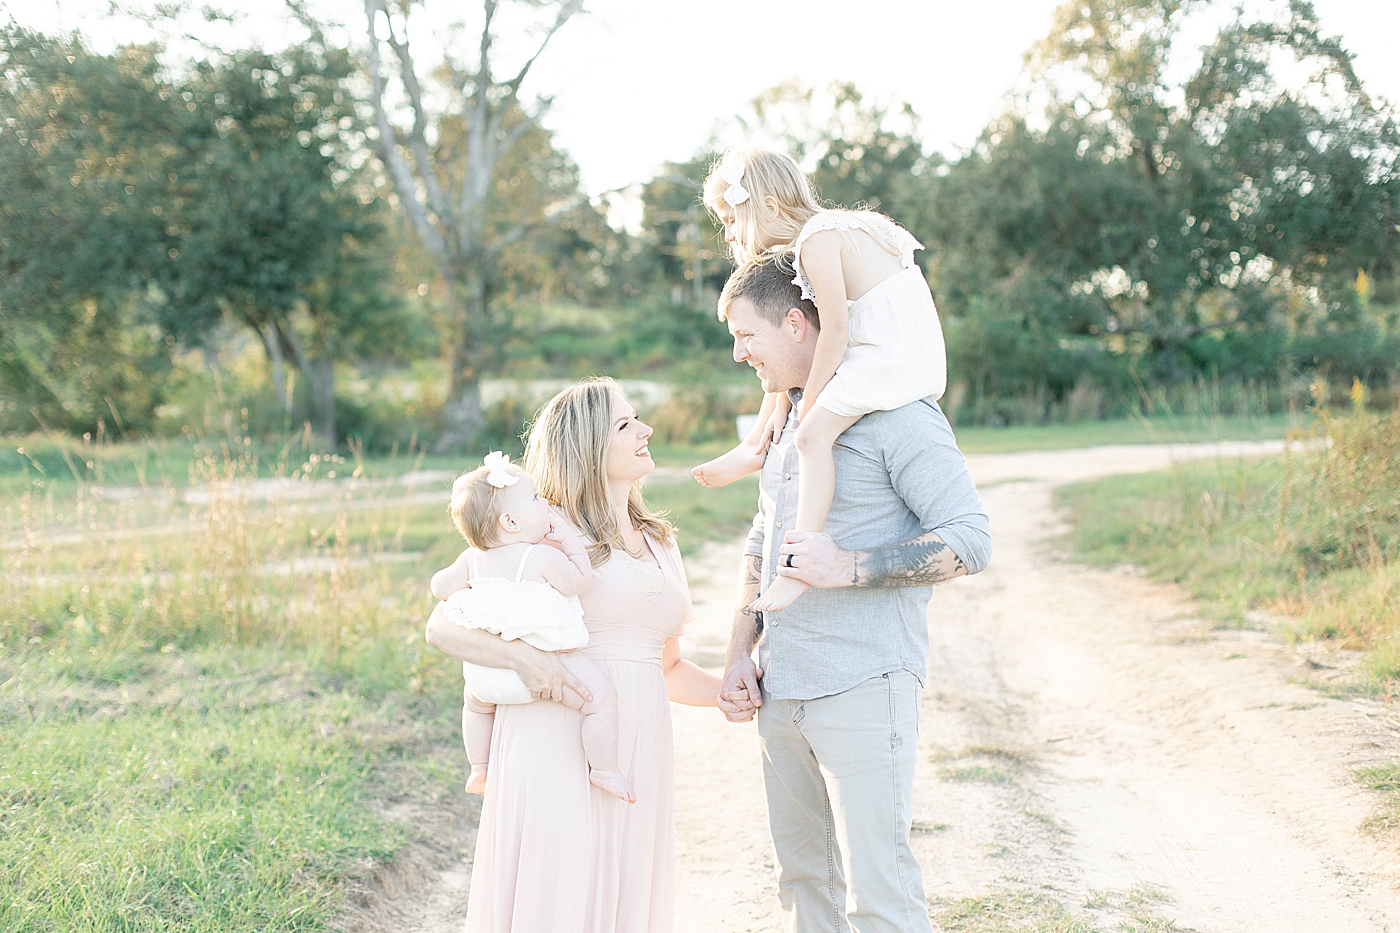 Family walking down a dirt path together | Photo by Little Sunshine Photography 